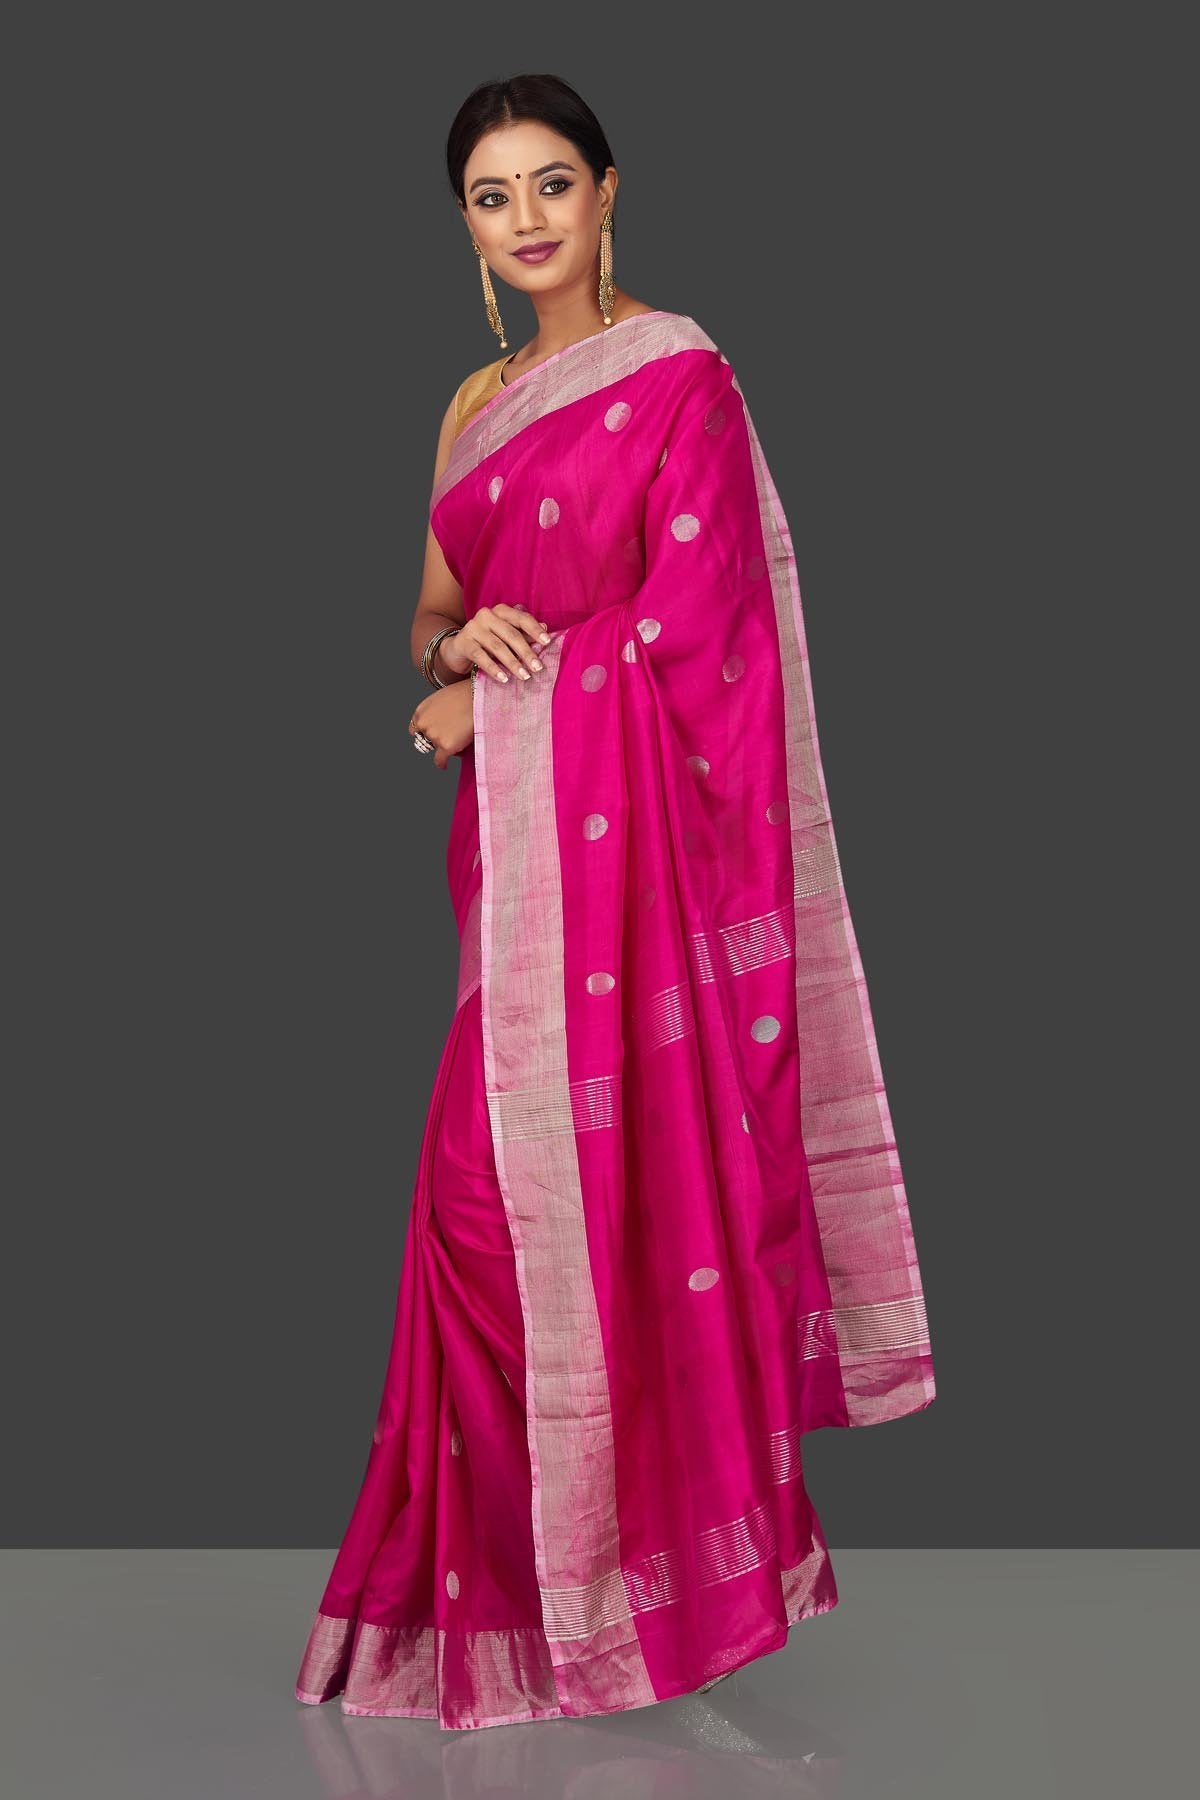 Buy bright pink Uppada silk saree online in USA with silver zari buta and border. Keep it elegant with handwoven silk sarees, Uppada silk sarees, soft silk sarees from Pure Elegance Indian fashion boutique in USA. We bring a especially curated collection of ethnic sarees for Indian women in USA under one roof!-left side